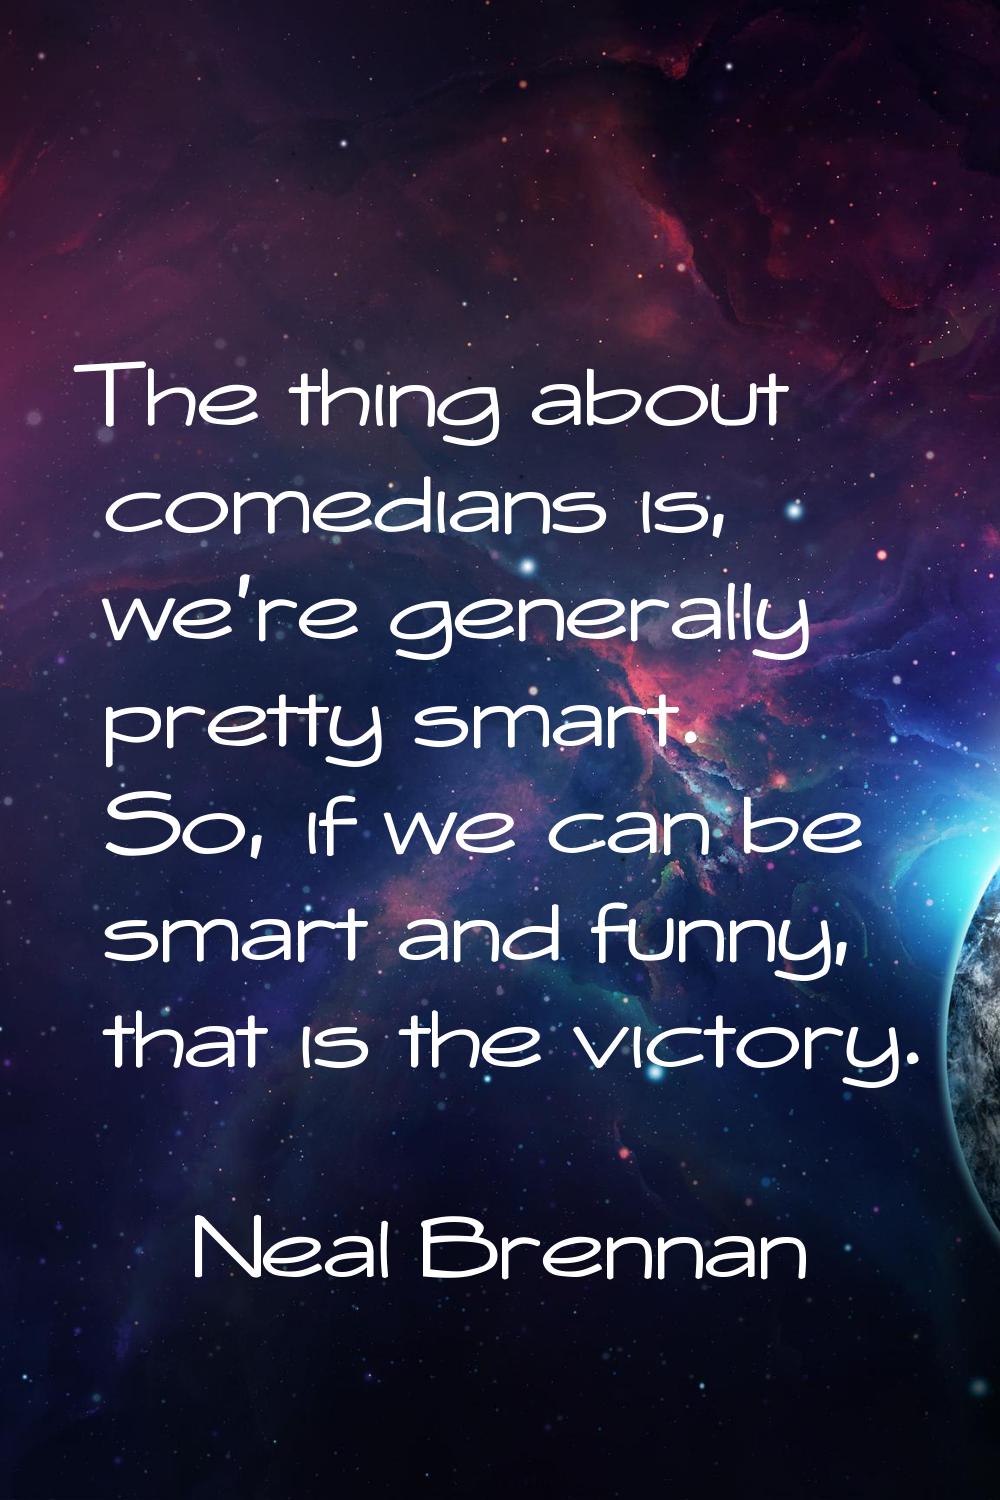 The thing about comedians is, we’re generally pretty smart. So, if we can be smart and funny, that 